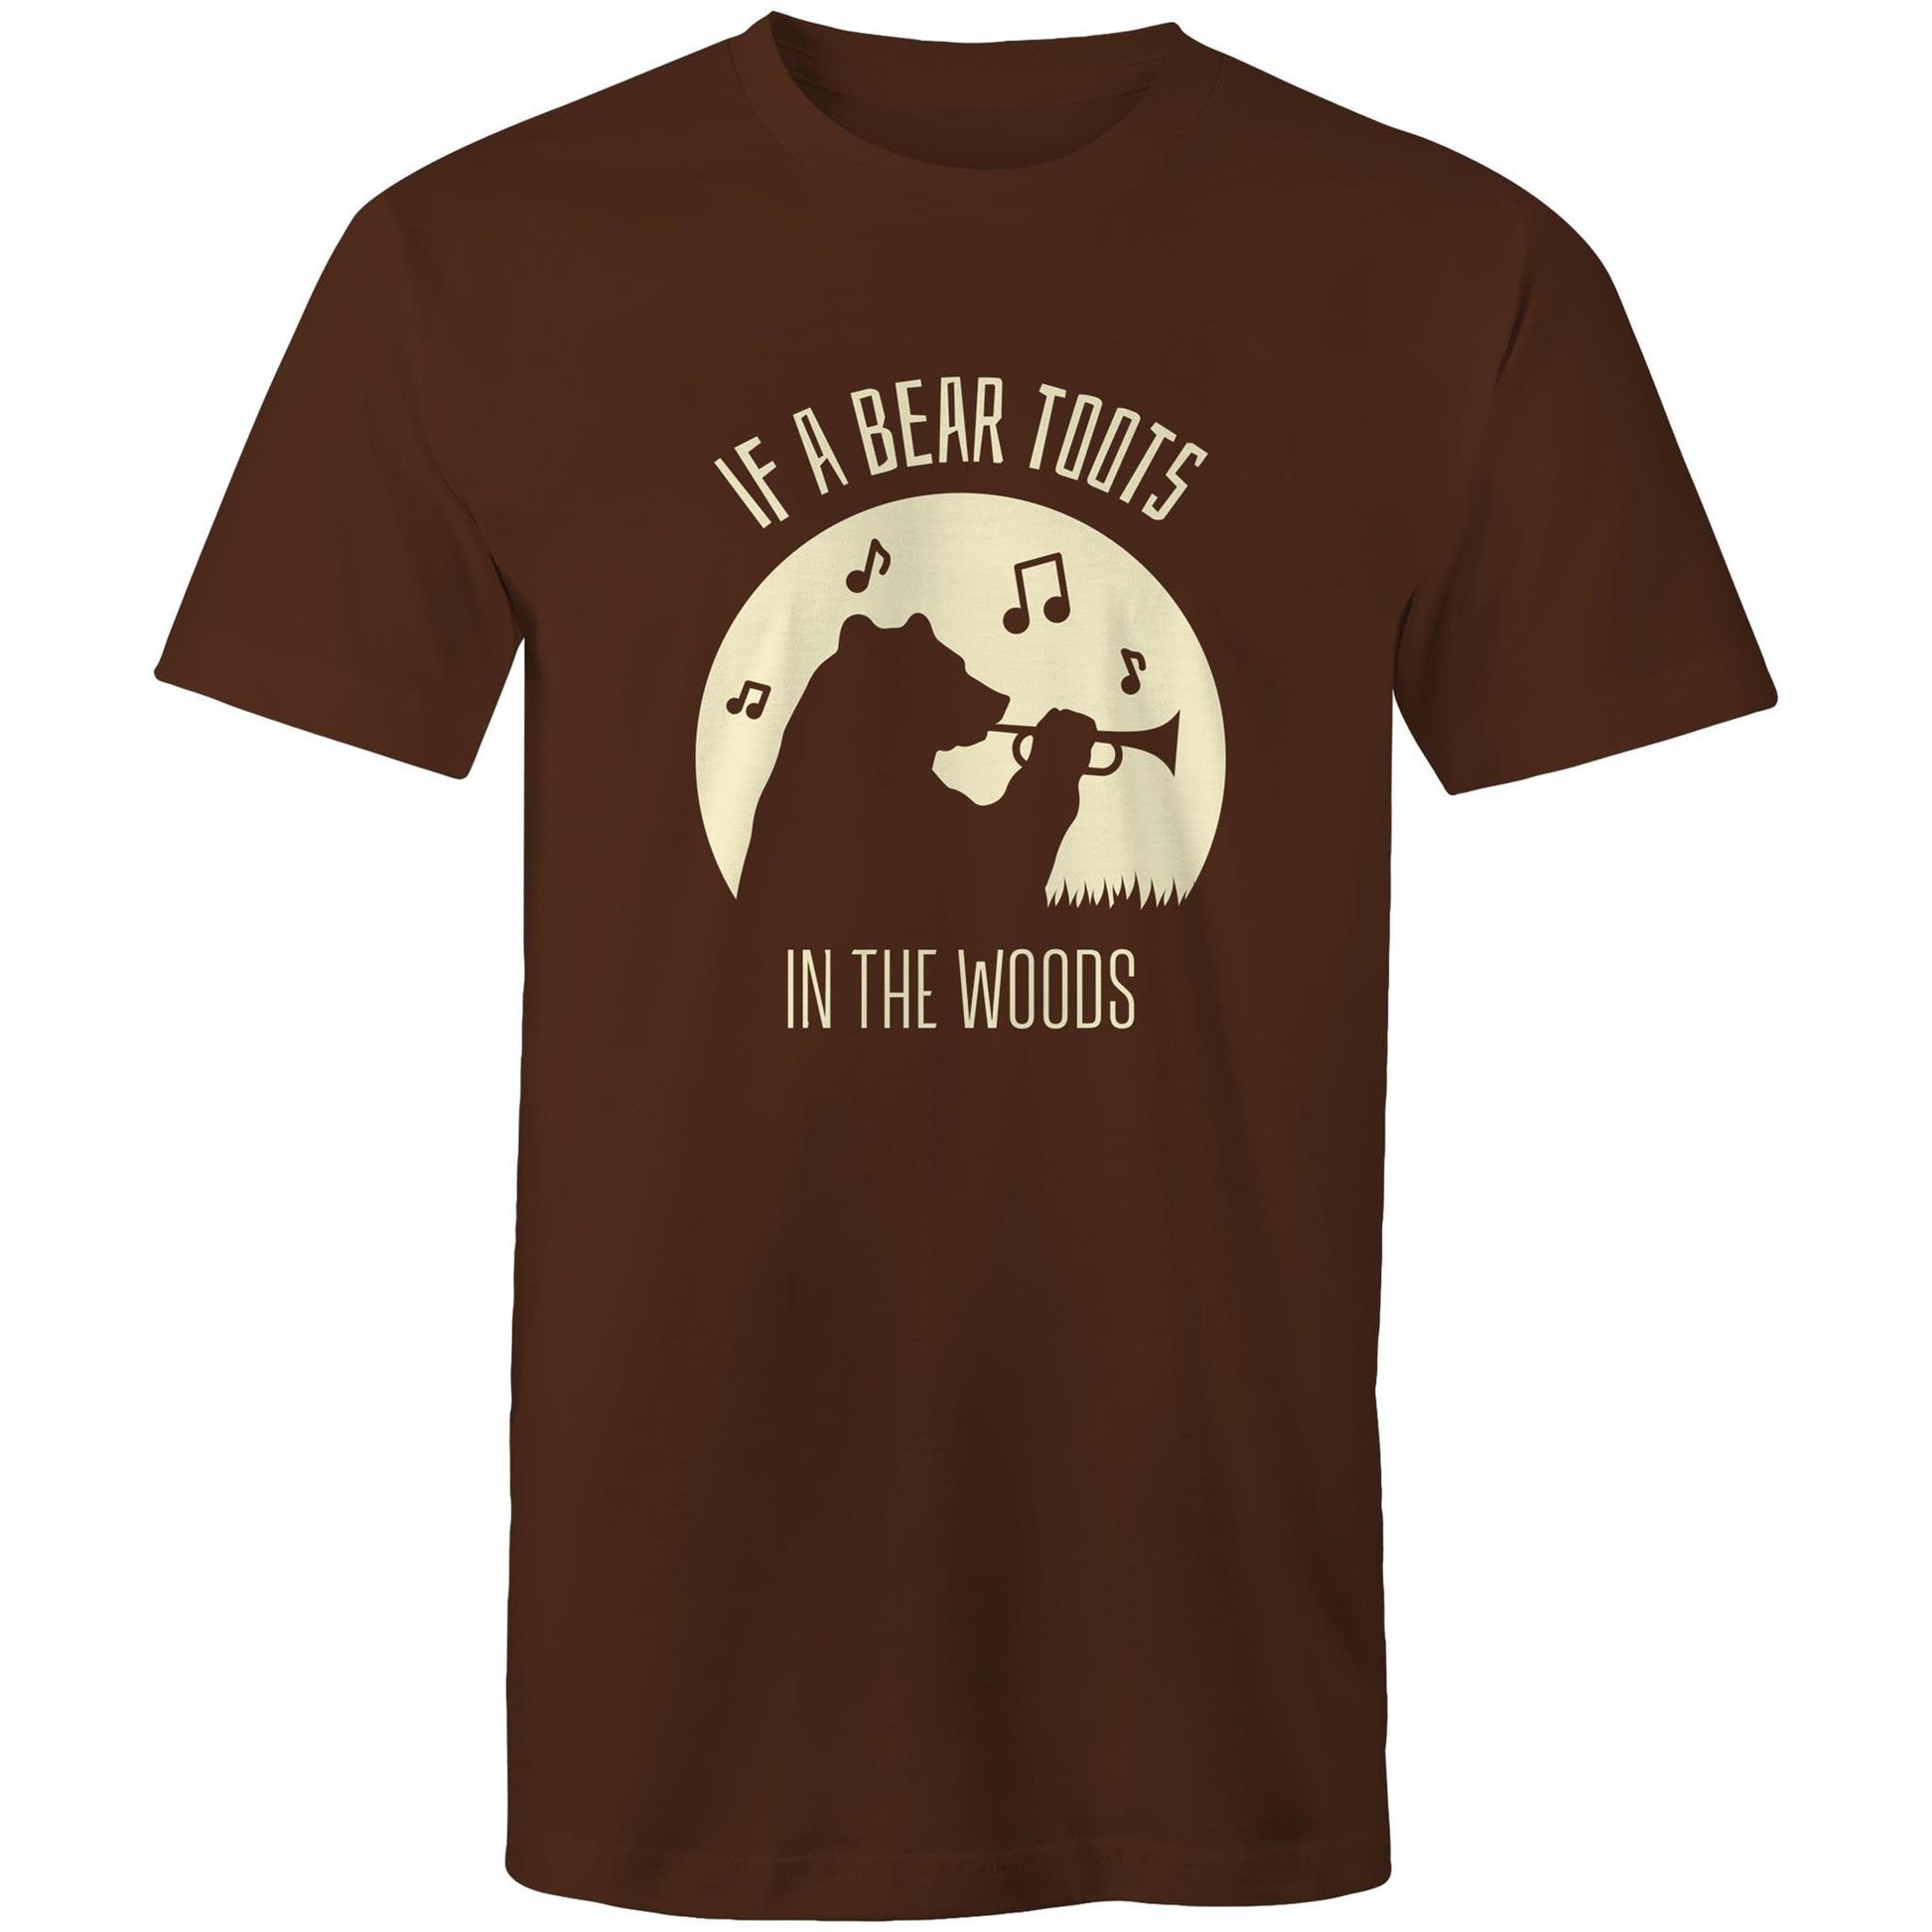 If A Bear Toots In The Woods, Trumpet Player - Mens T-Shirt Dark Chocolate Mens T-shirt animal Music